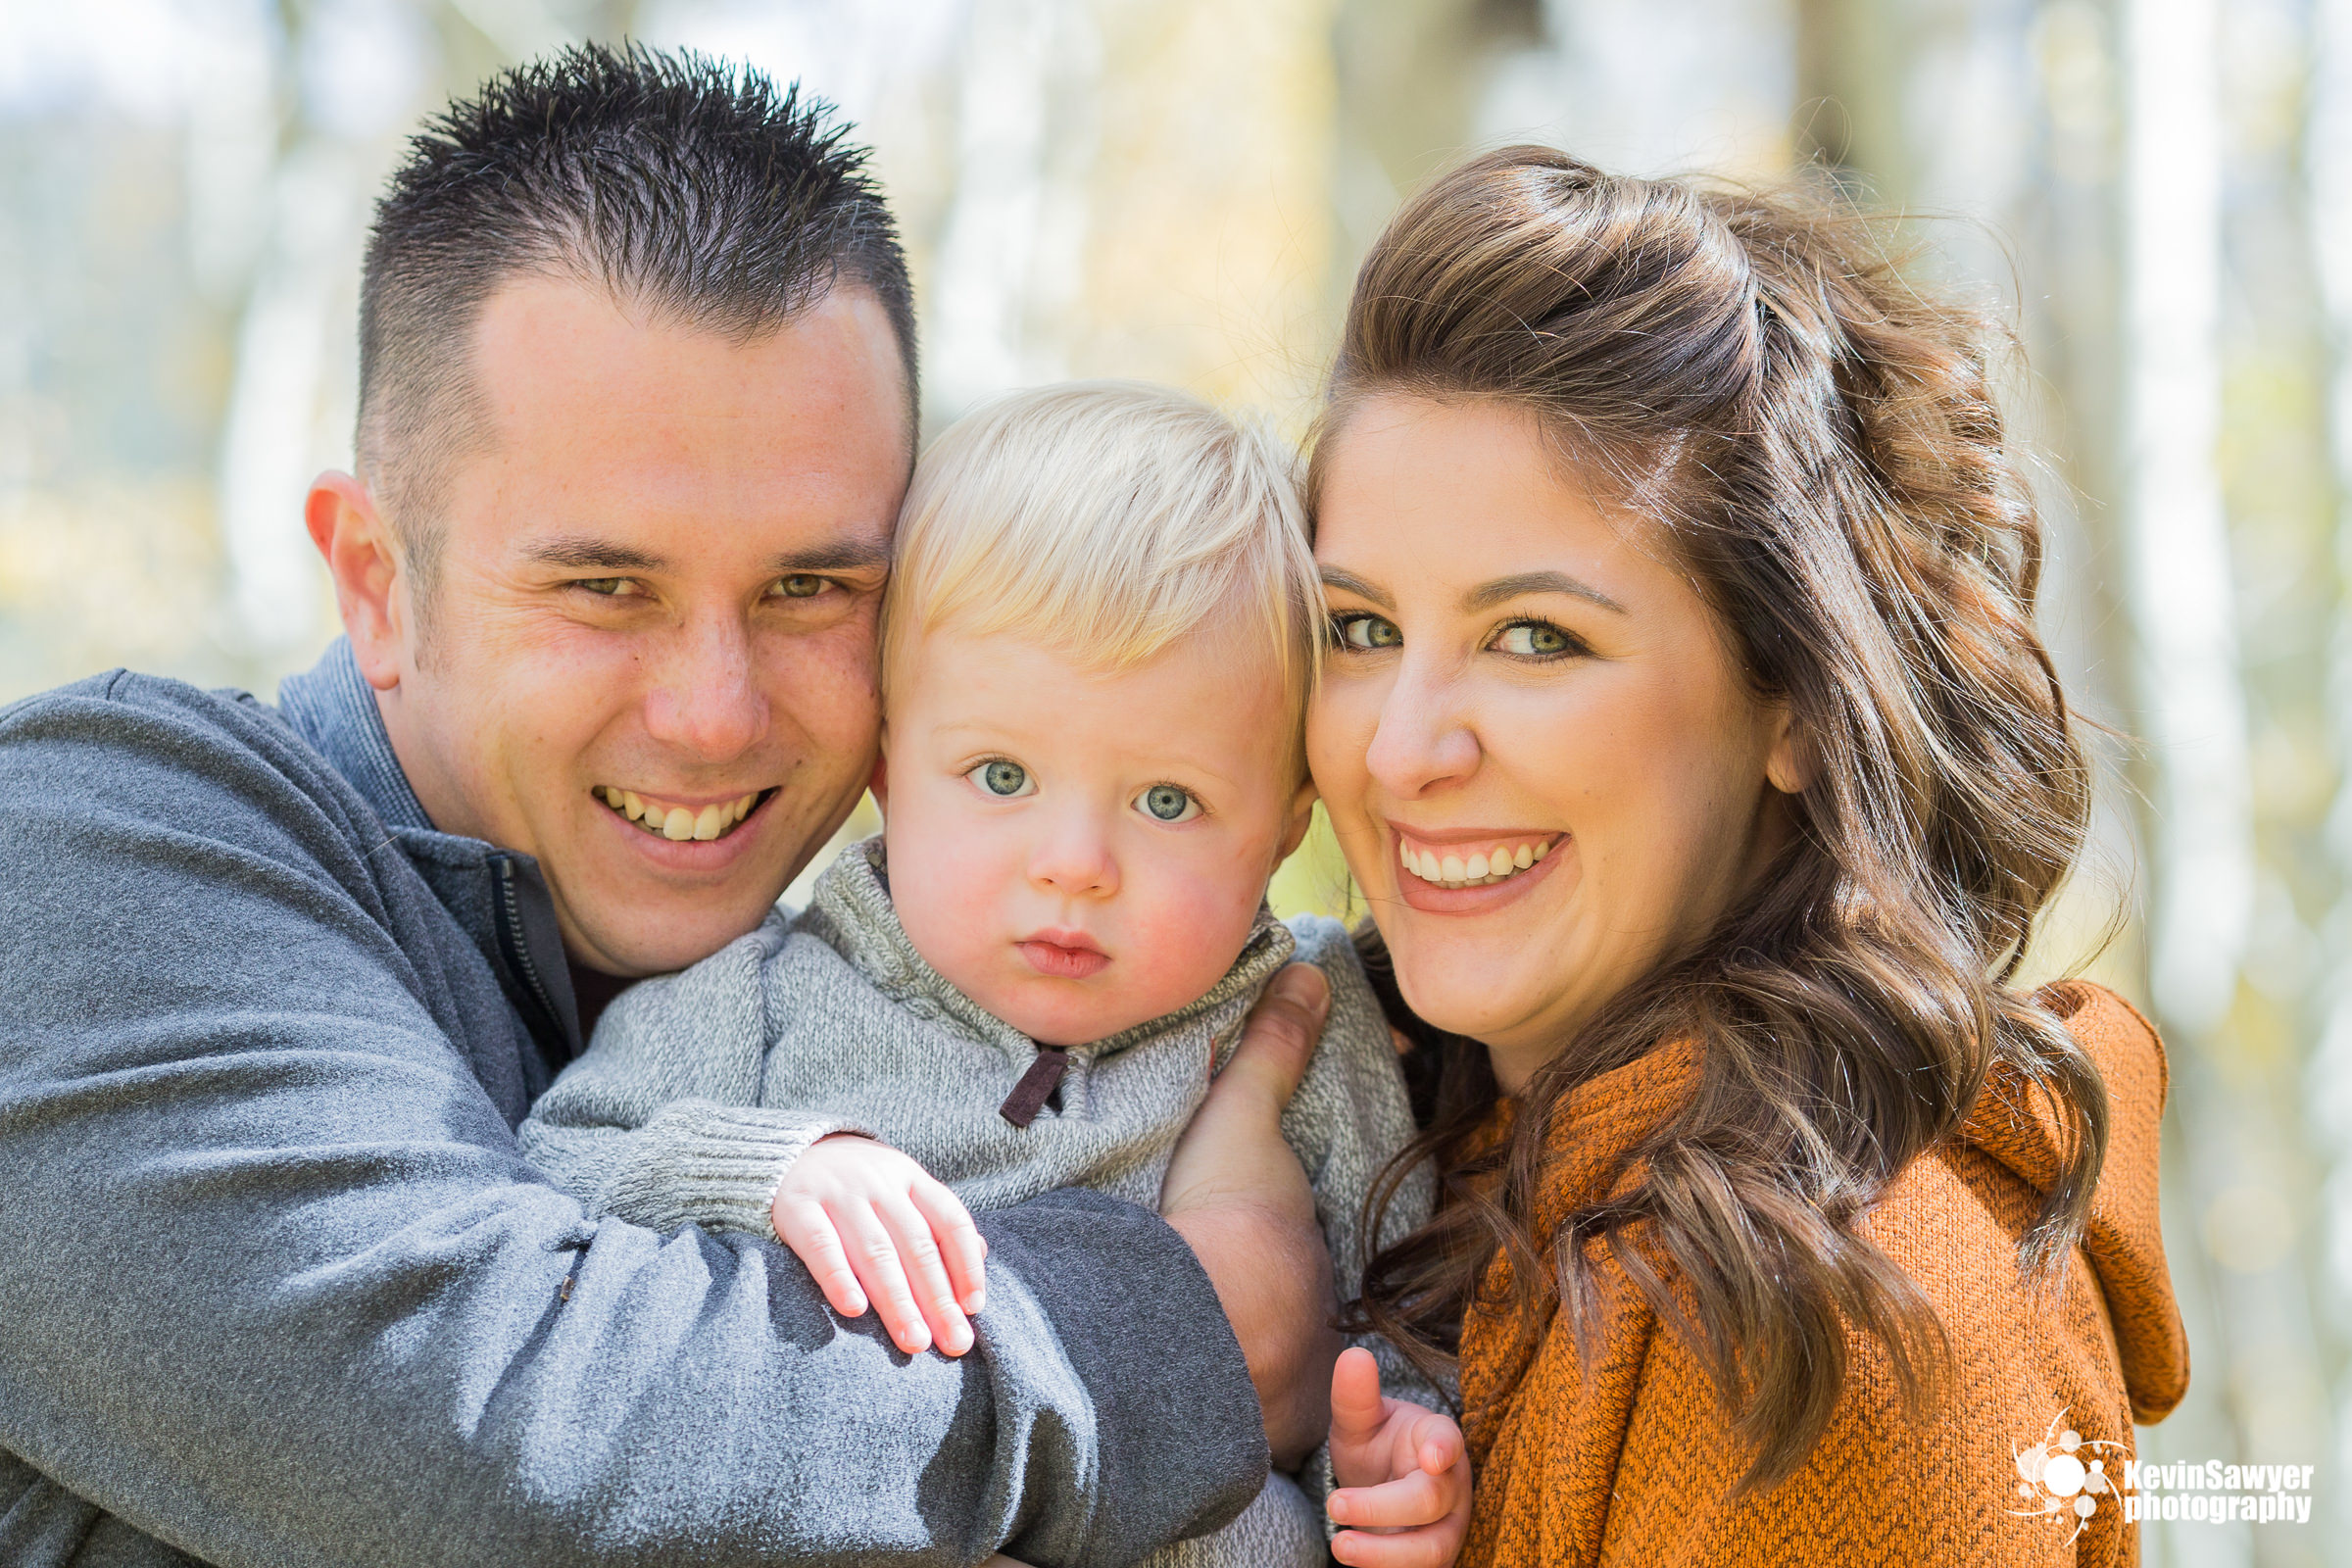 lake-tahoe-hope-valley-family-portrait-photographer-kevin-sawyer-photography-fall-photos